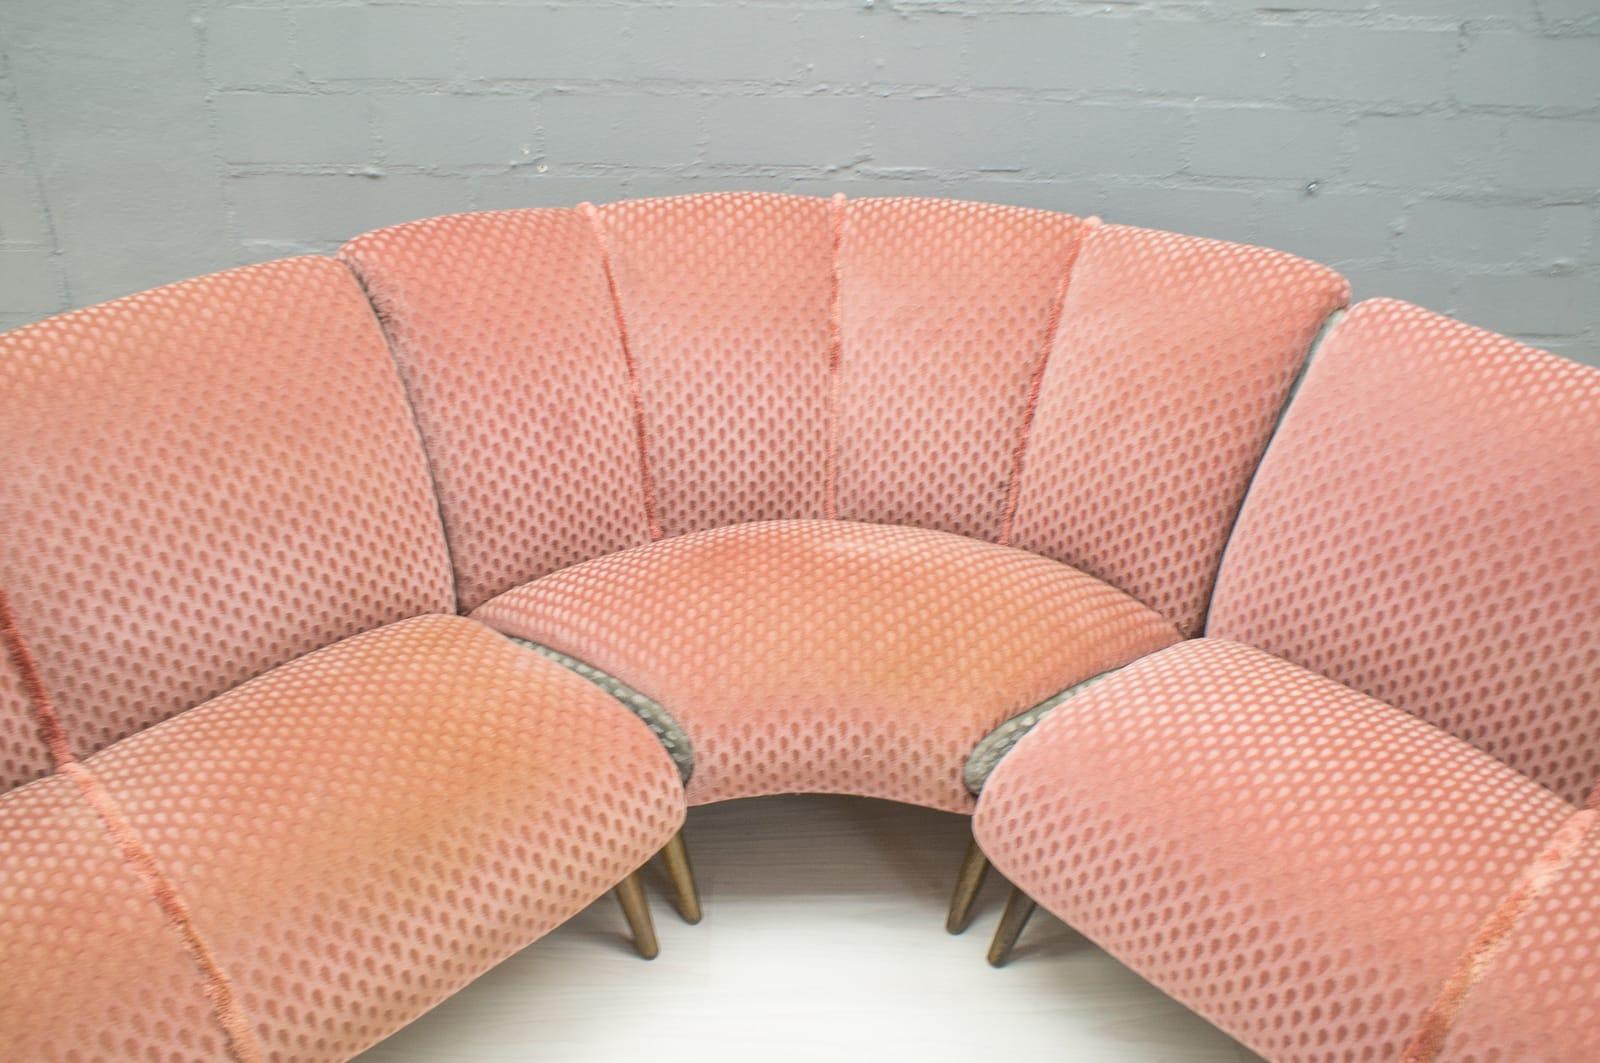 Extremely rare huge sofa set by Norman Bel Geddes from the 1950s, USA 10